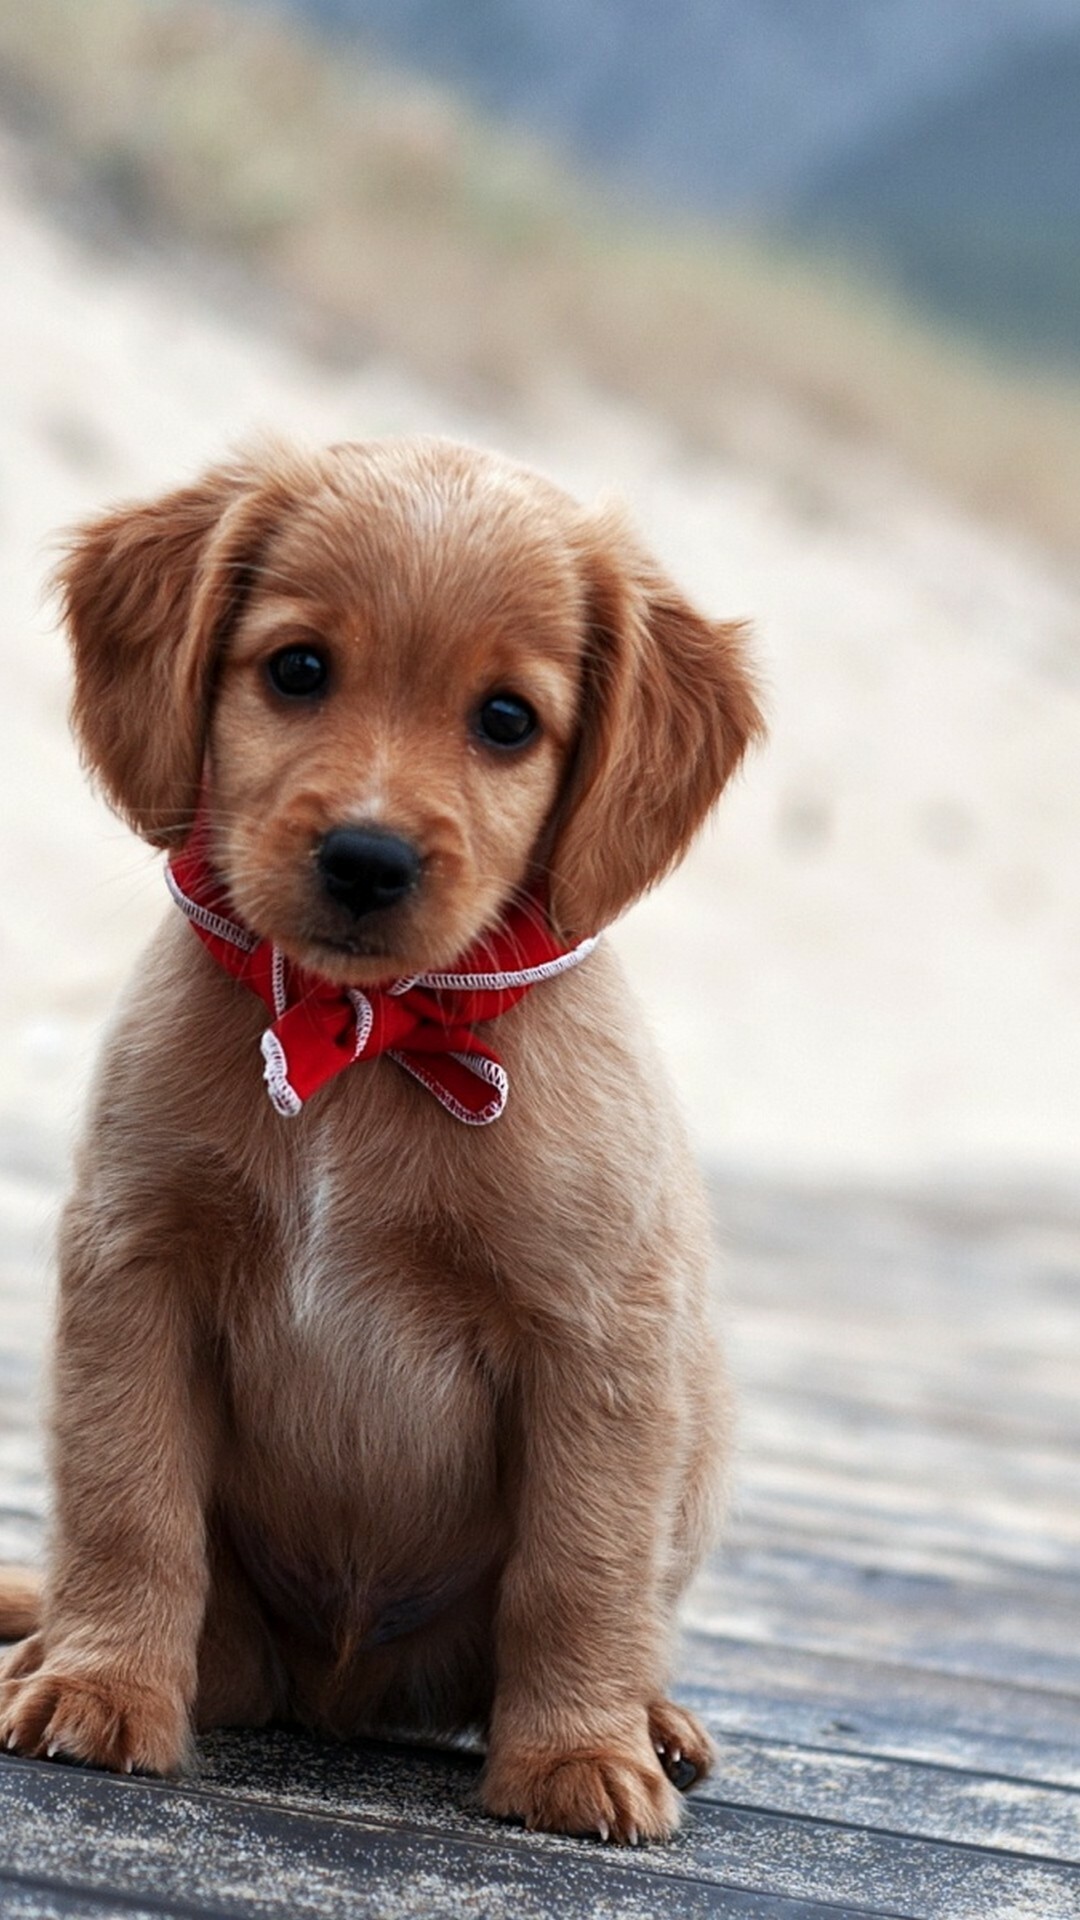 Puppy: A domesticated canine mammal, Referred to as "man's best friend, Pup. 1080x1920 Full HD Wallpaper.